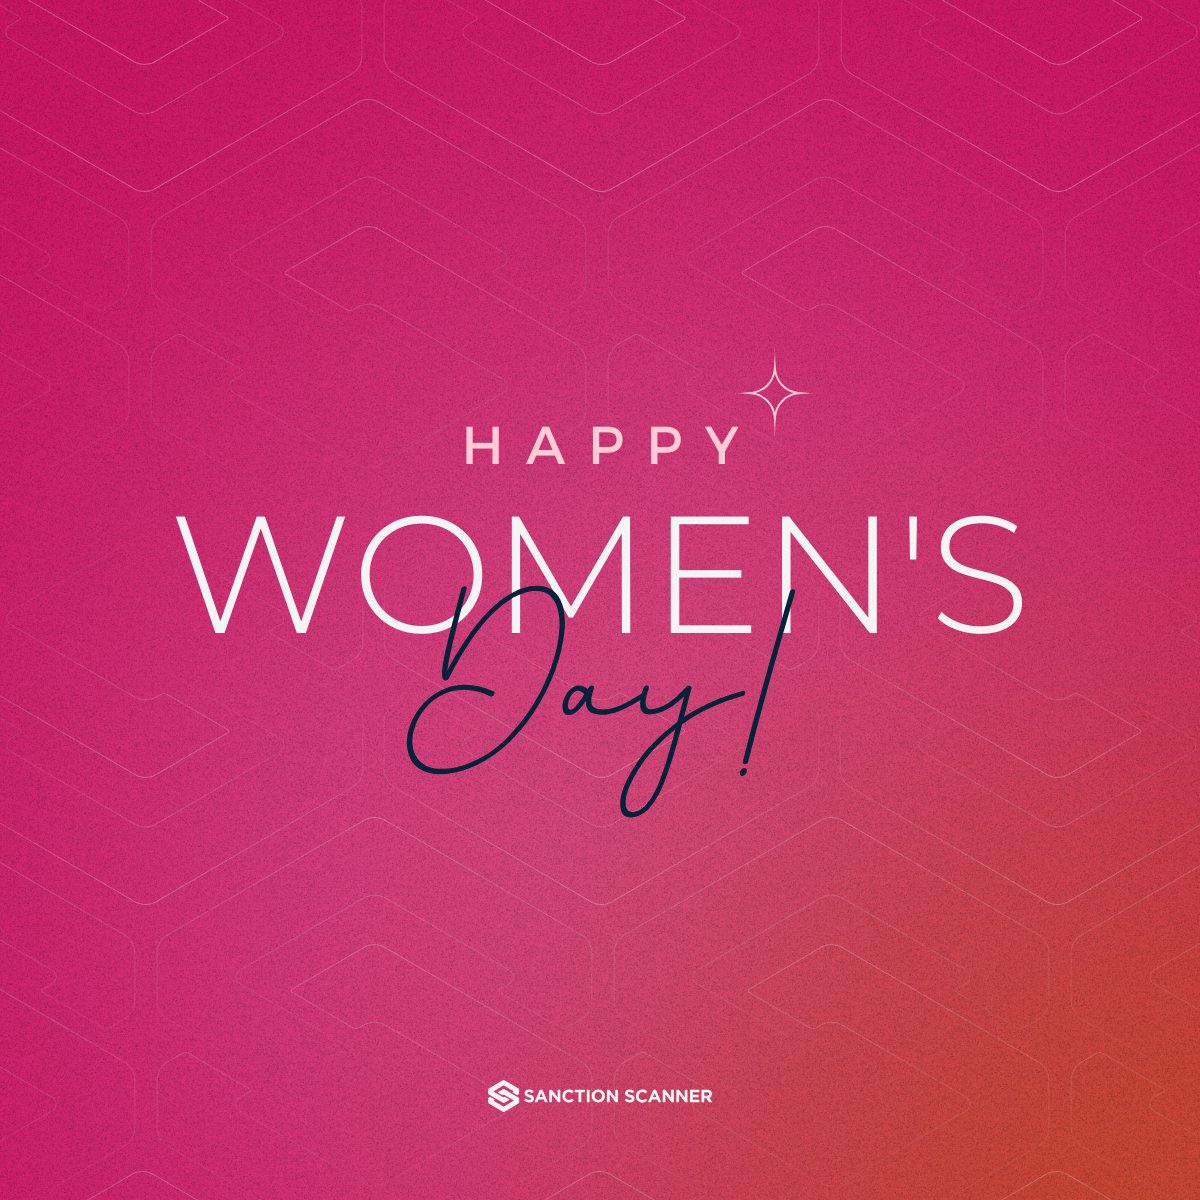 Happy Women's Day! 🌸 Celebrating women's achievements globally & our team's 47% female workforce. Moving towards gender equality, highlighting women's crucial role in our success. Still striving for a workplace where every woman can thrive, lead, & innovate. #WomensDay 💪